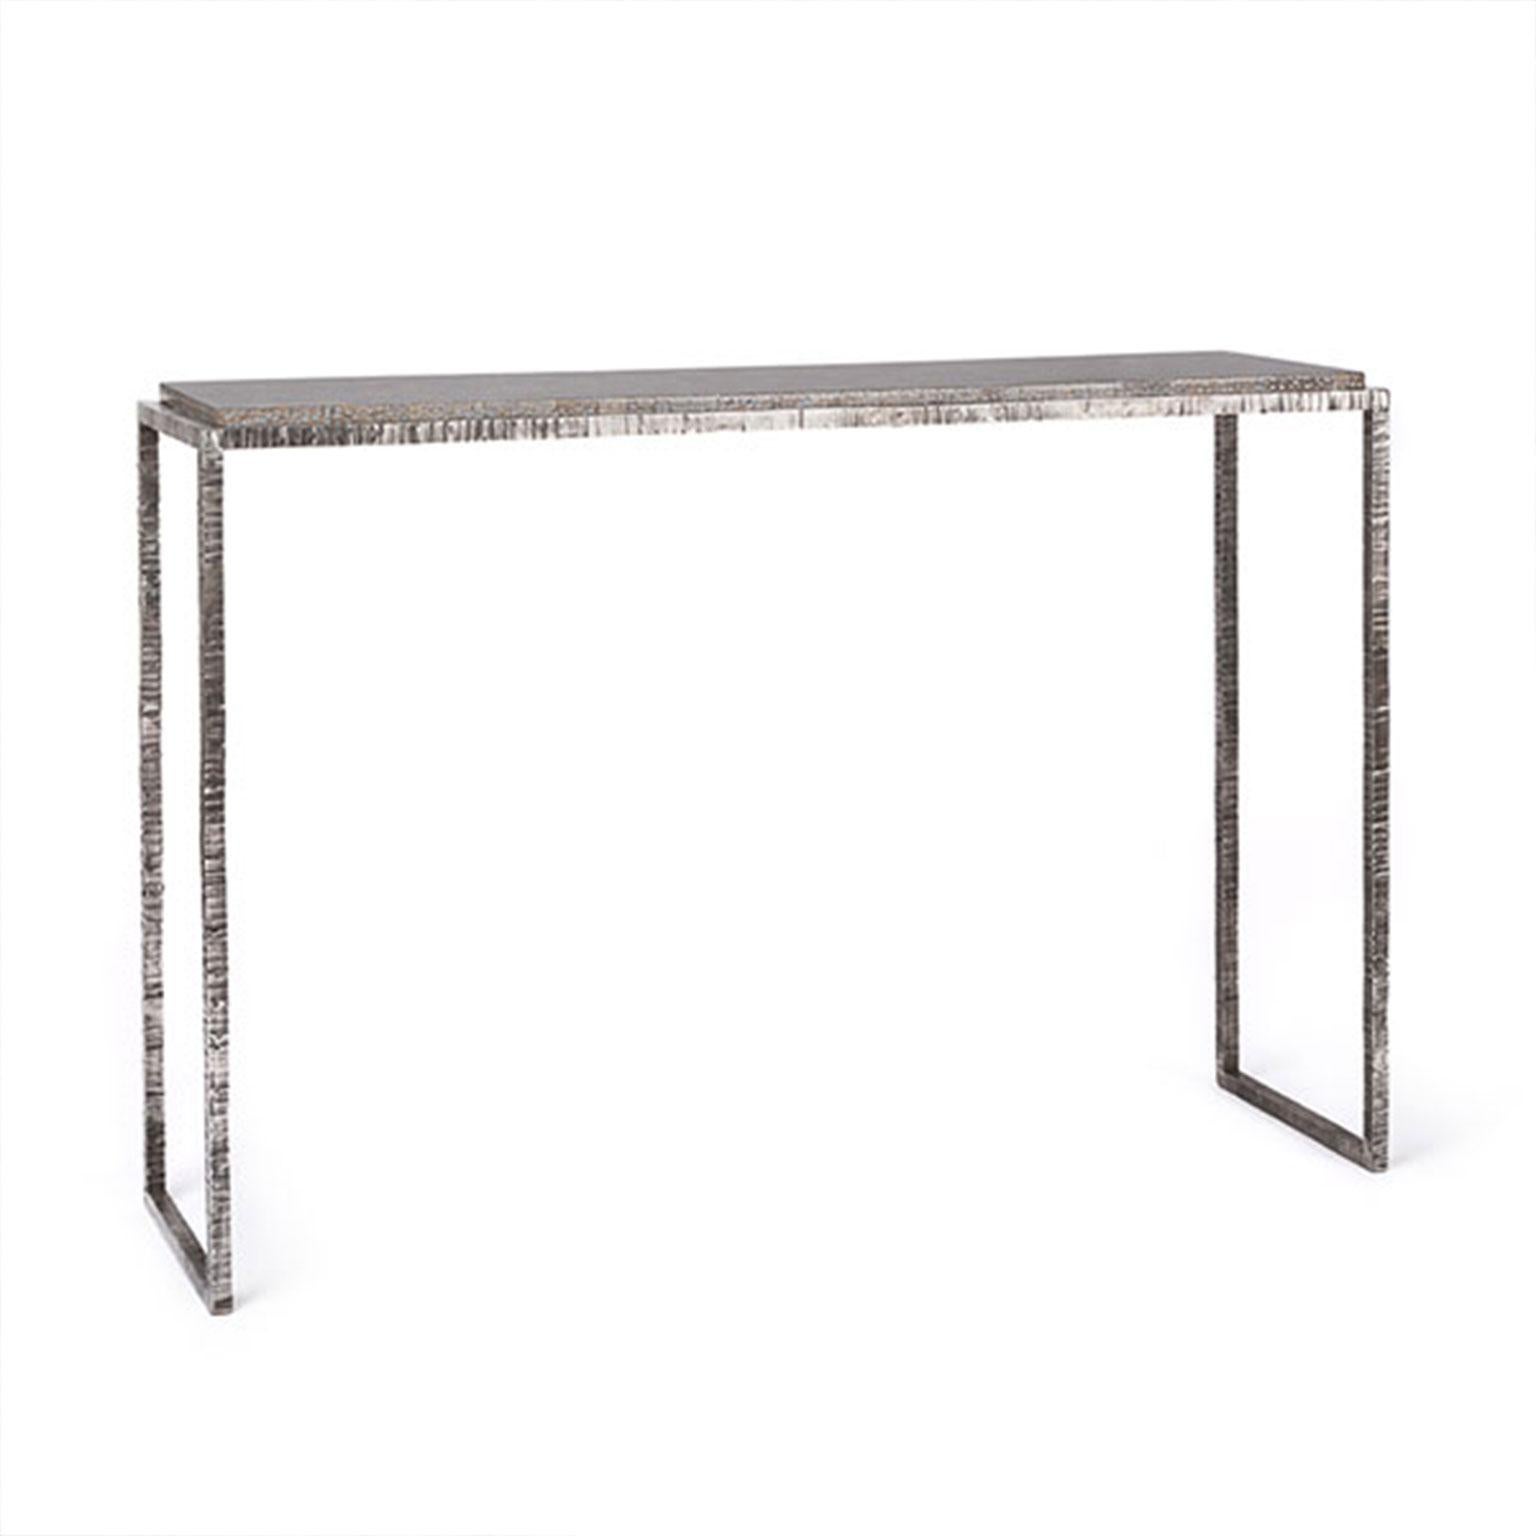 Made from stainless steel, the Hanoi console table has been textured to provide a unique, ripple like texture which has then been polished to create a beautiful shine. Shown here with a specialists egg shell lacquered top.

Designed and